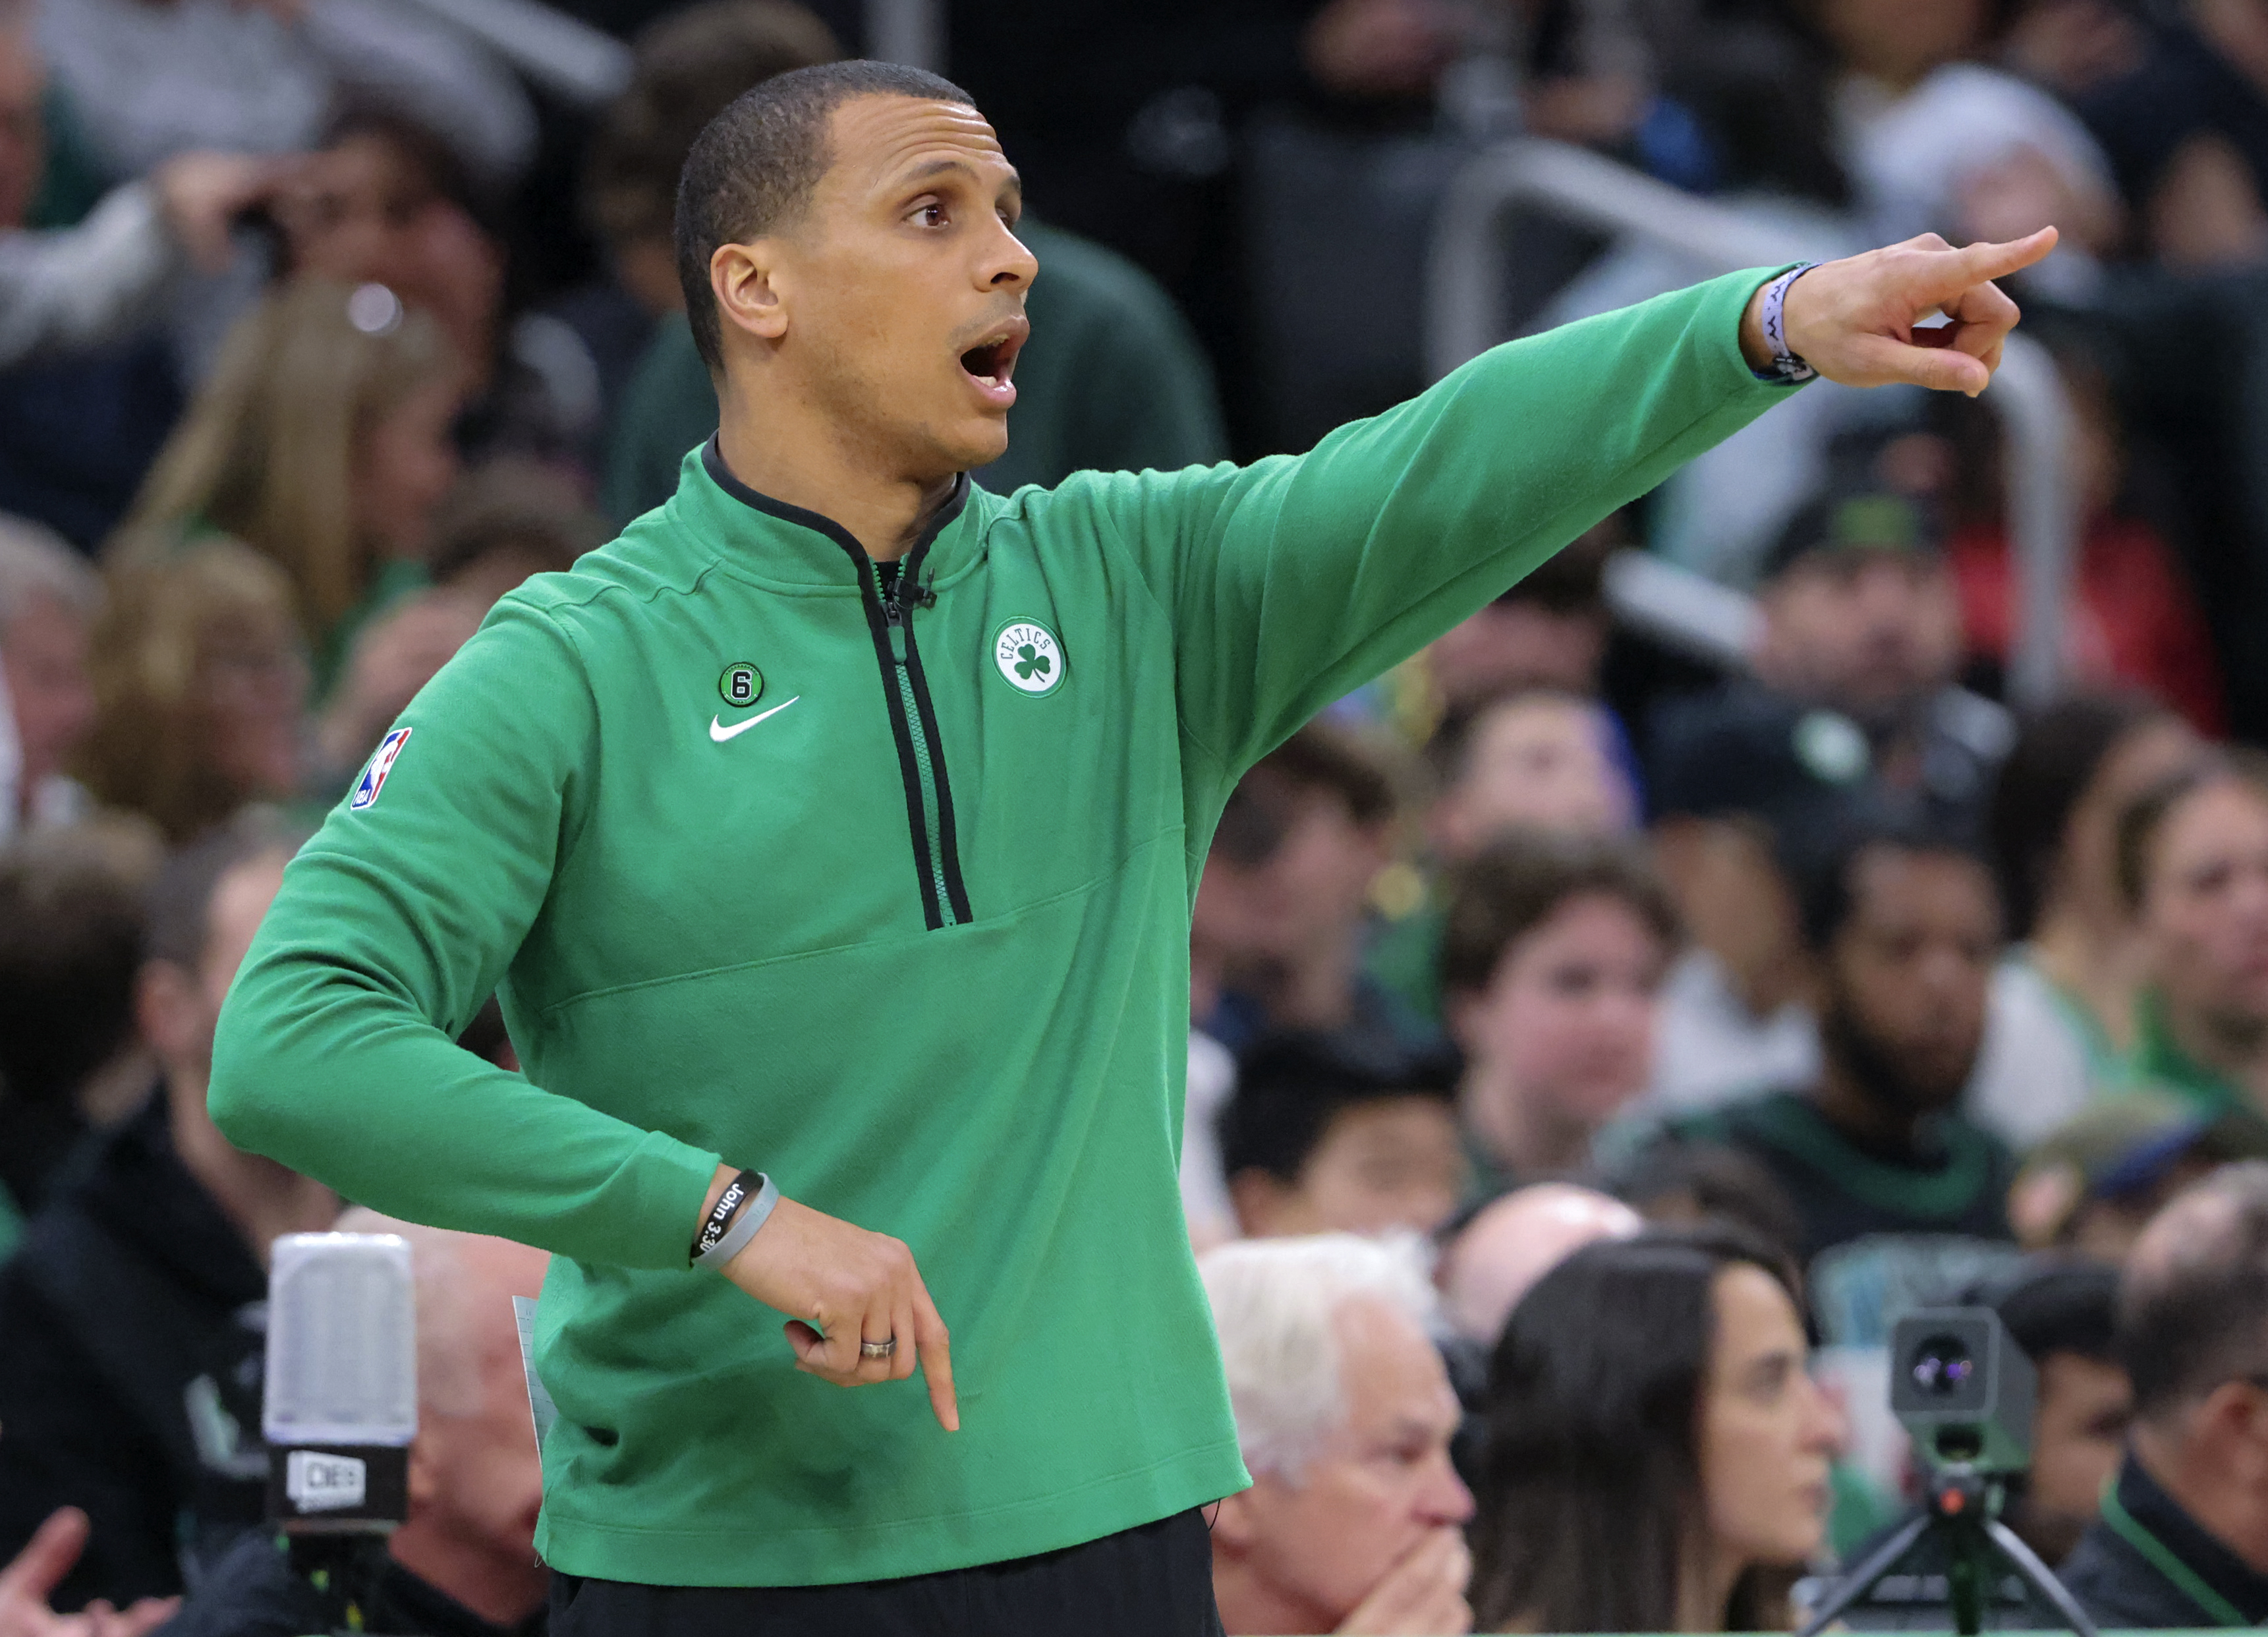 Jazz reportedly want to interview Celtics assistant coach Will Hardy